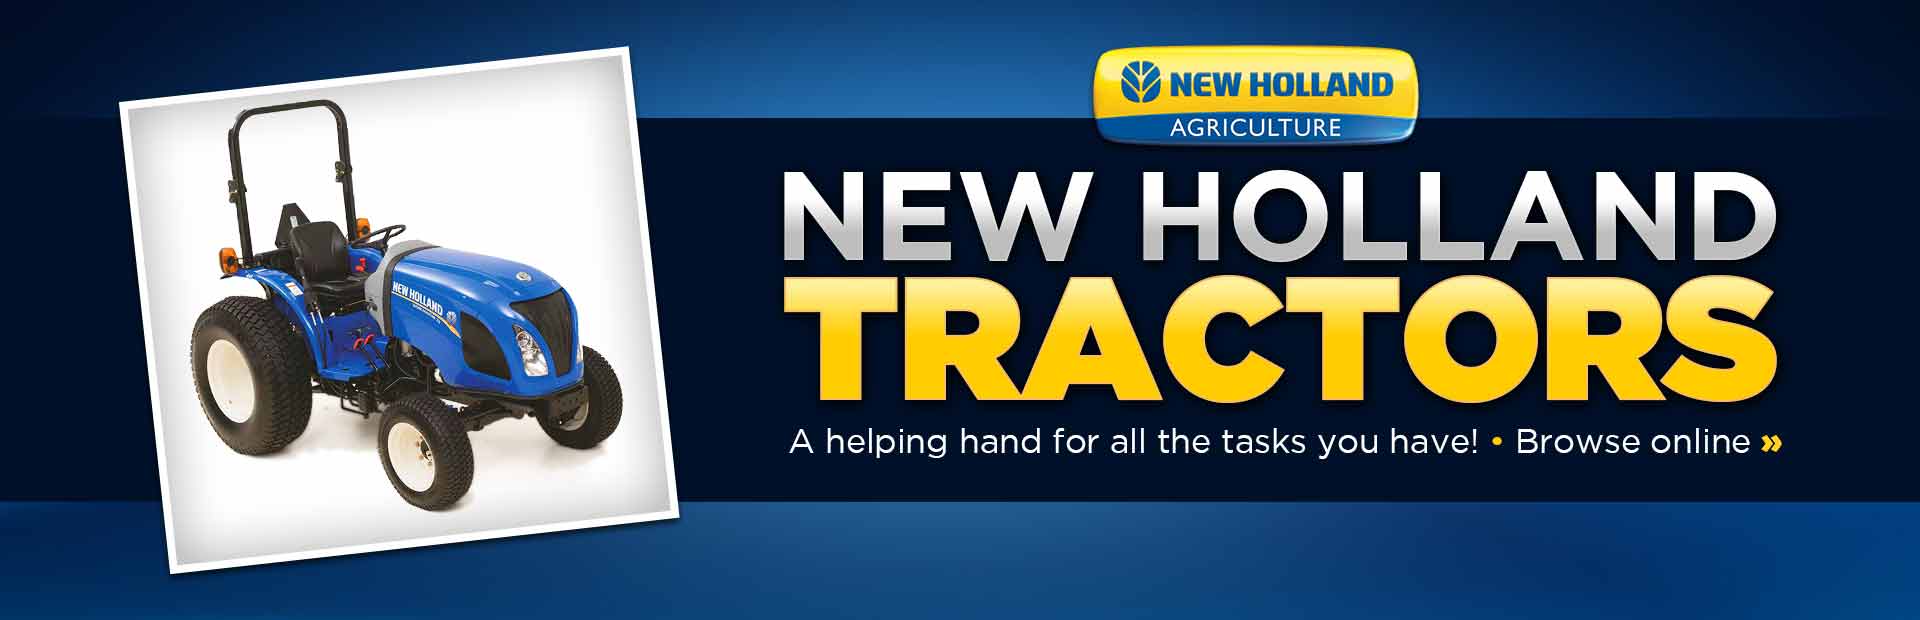 New Holland Tractor Logo - Cherry Valley Tractor Sales provides premium outdoor power equipment ...